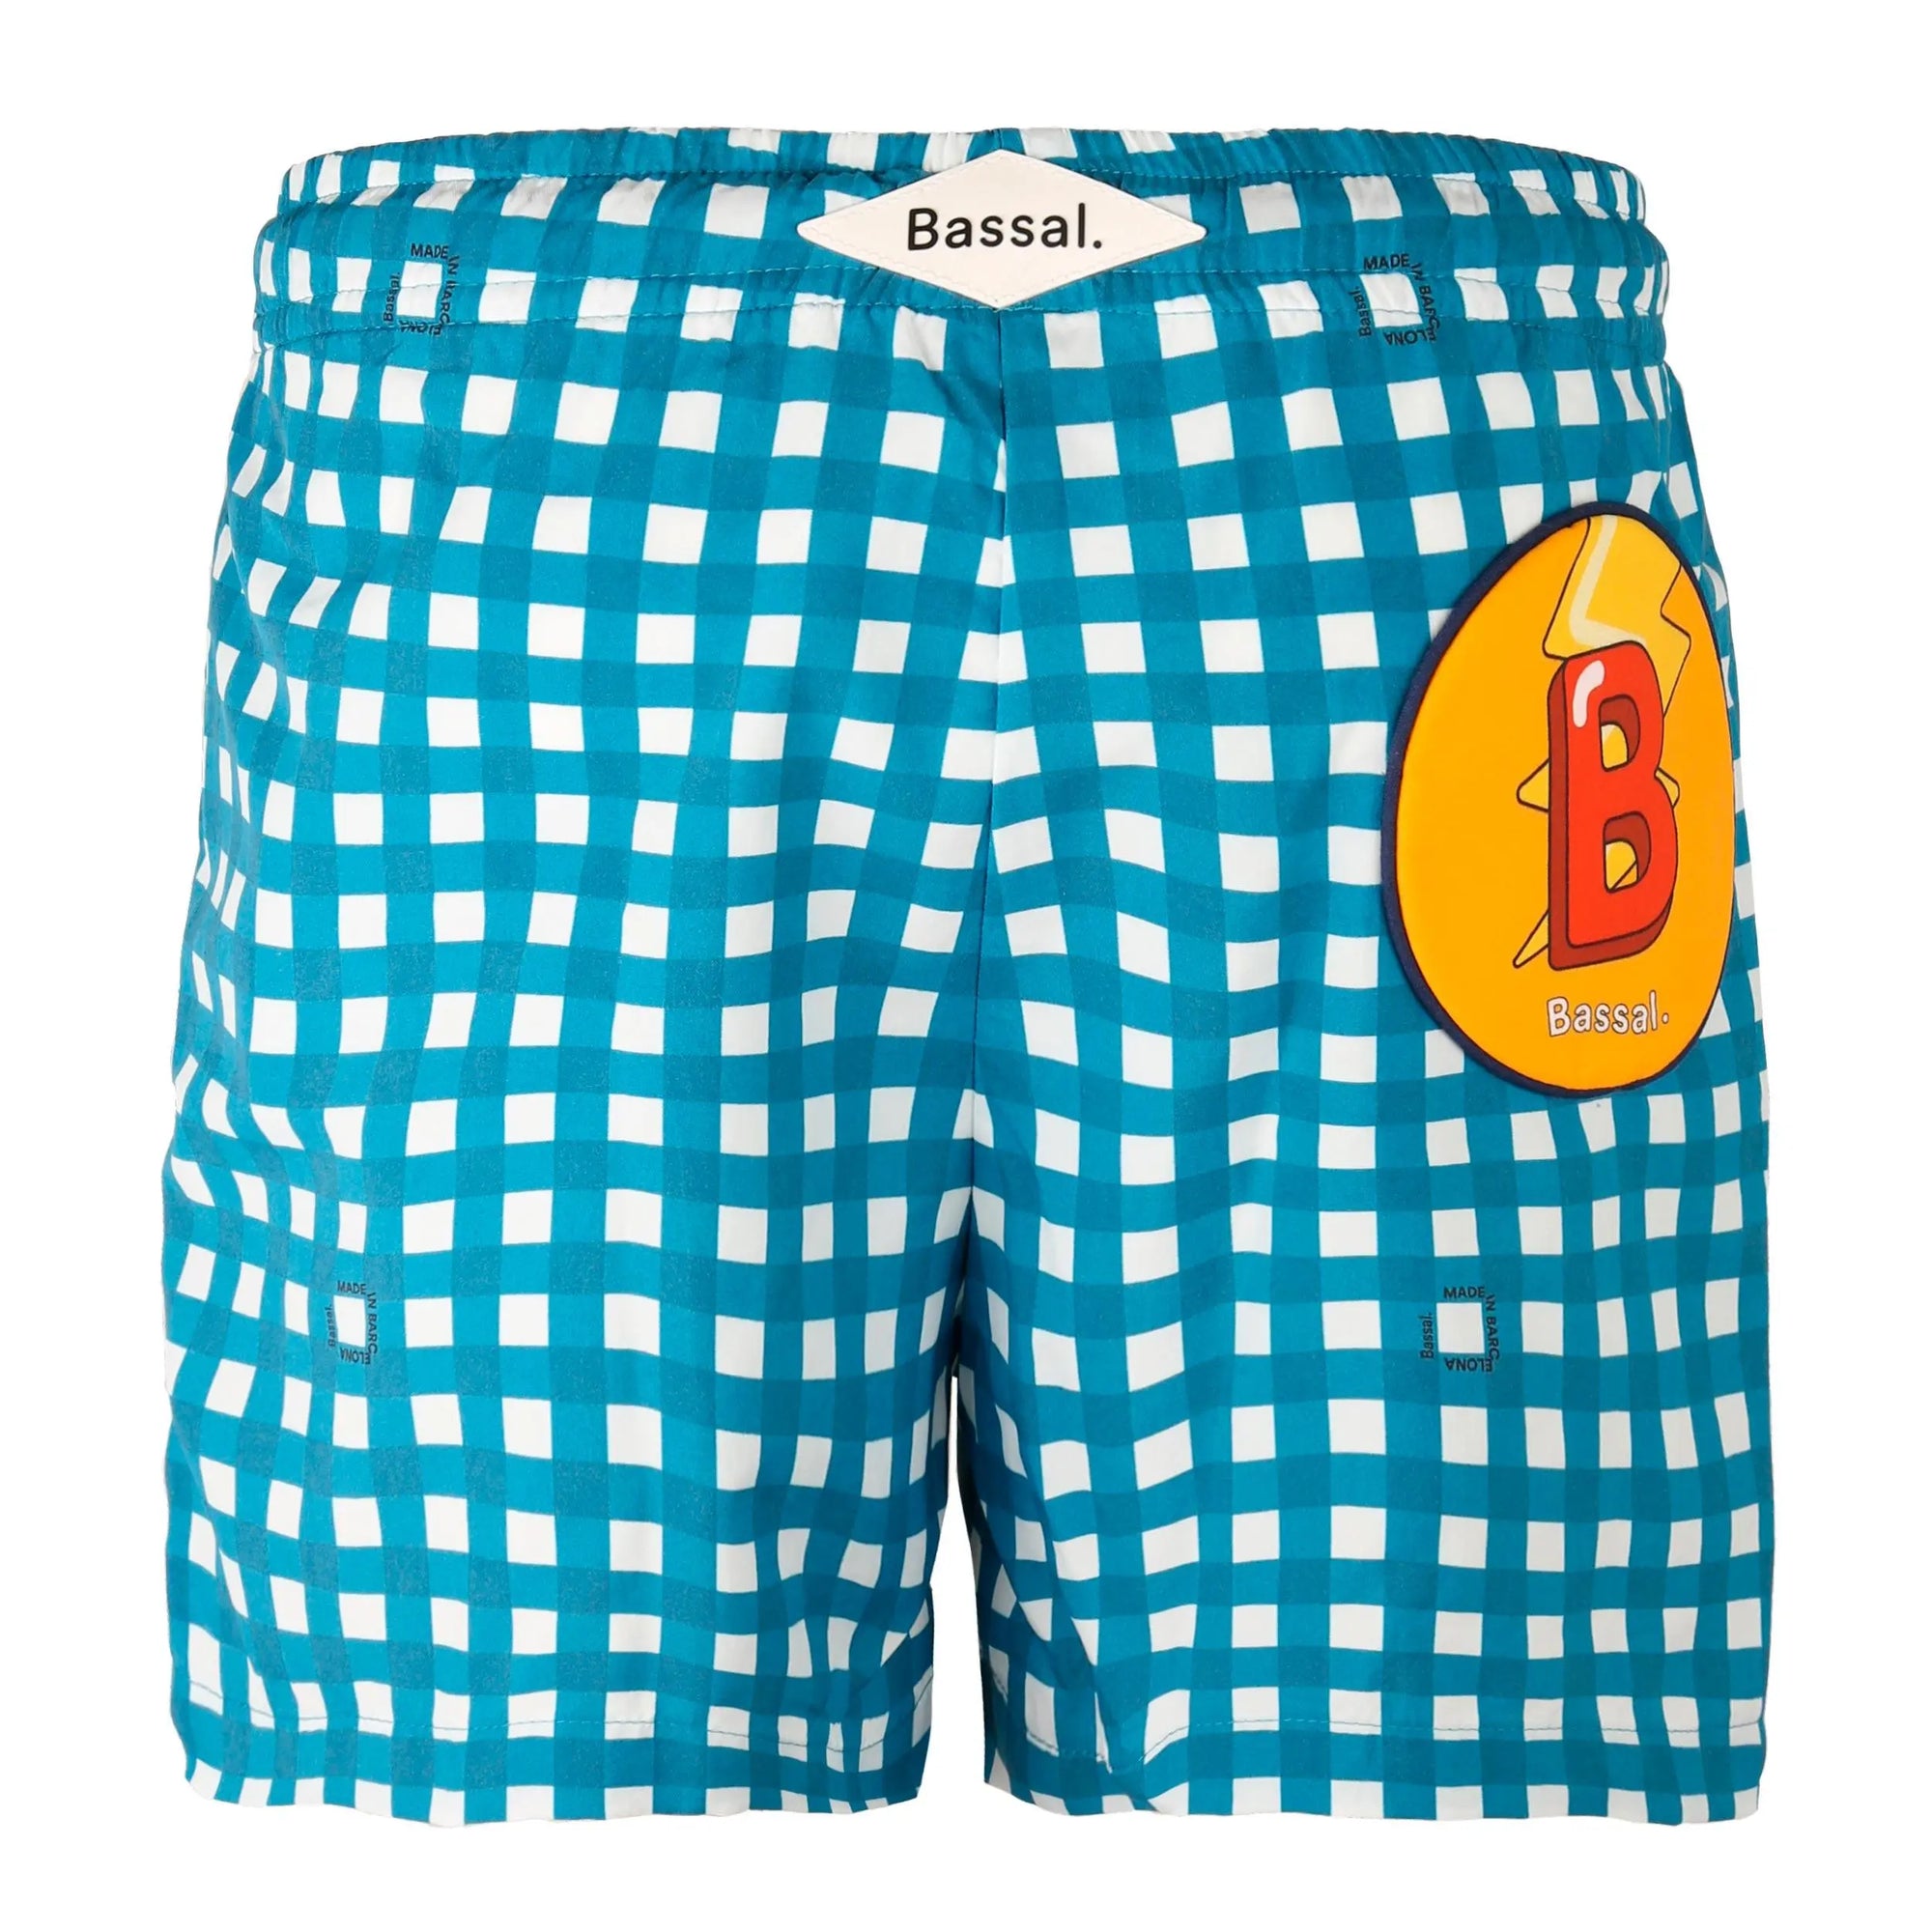 A pair of blue and white checkered Vichy Kids Swimwear with a navy drawstring is neatly folded inside an open orange box. Attached to the swimwear is a white tag with the brand name "Bassal." The box, featuring the "Bassalstore" logo, is placed on top of another box in a chic store in Barcelona.